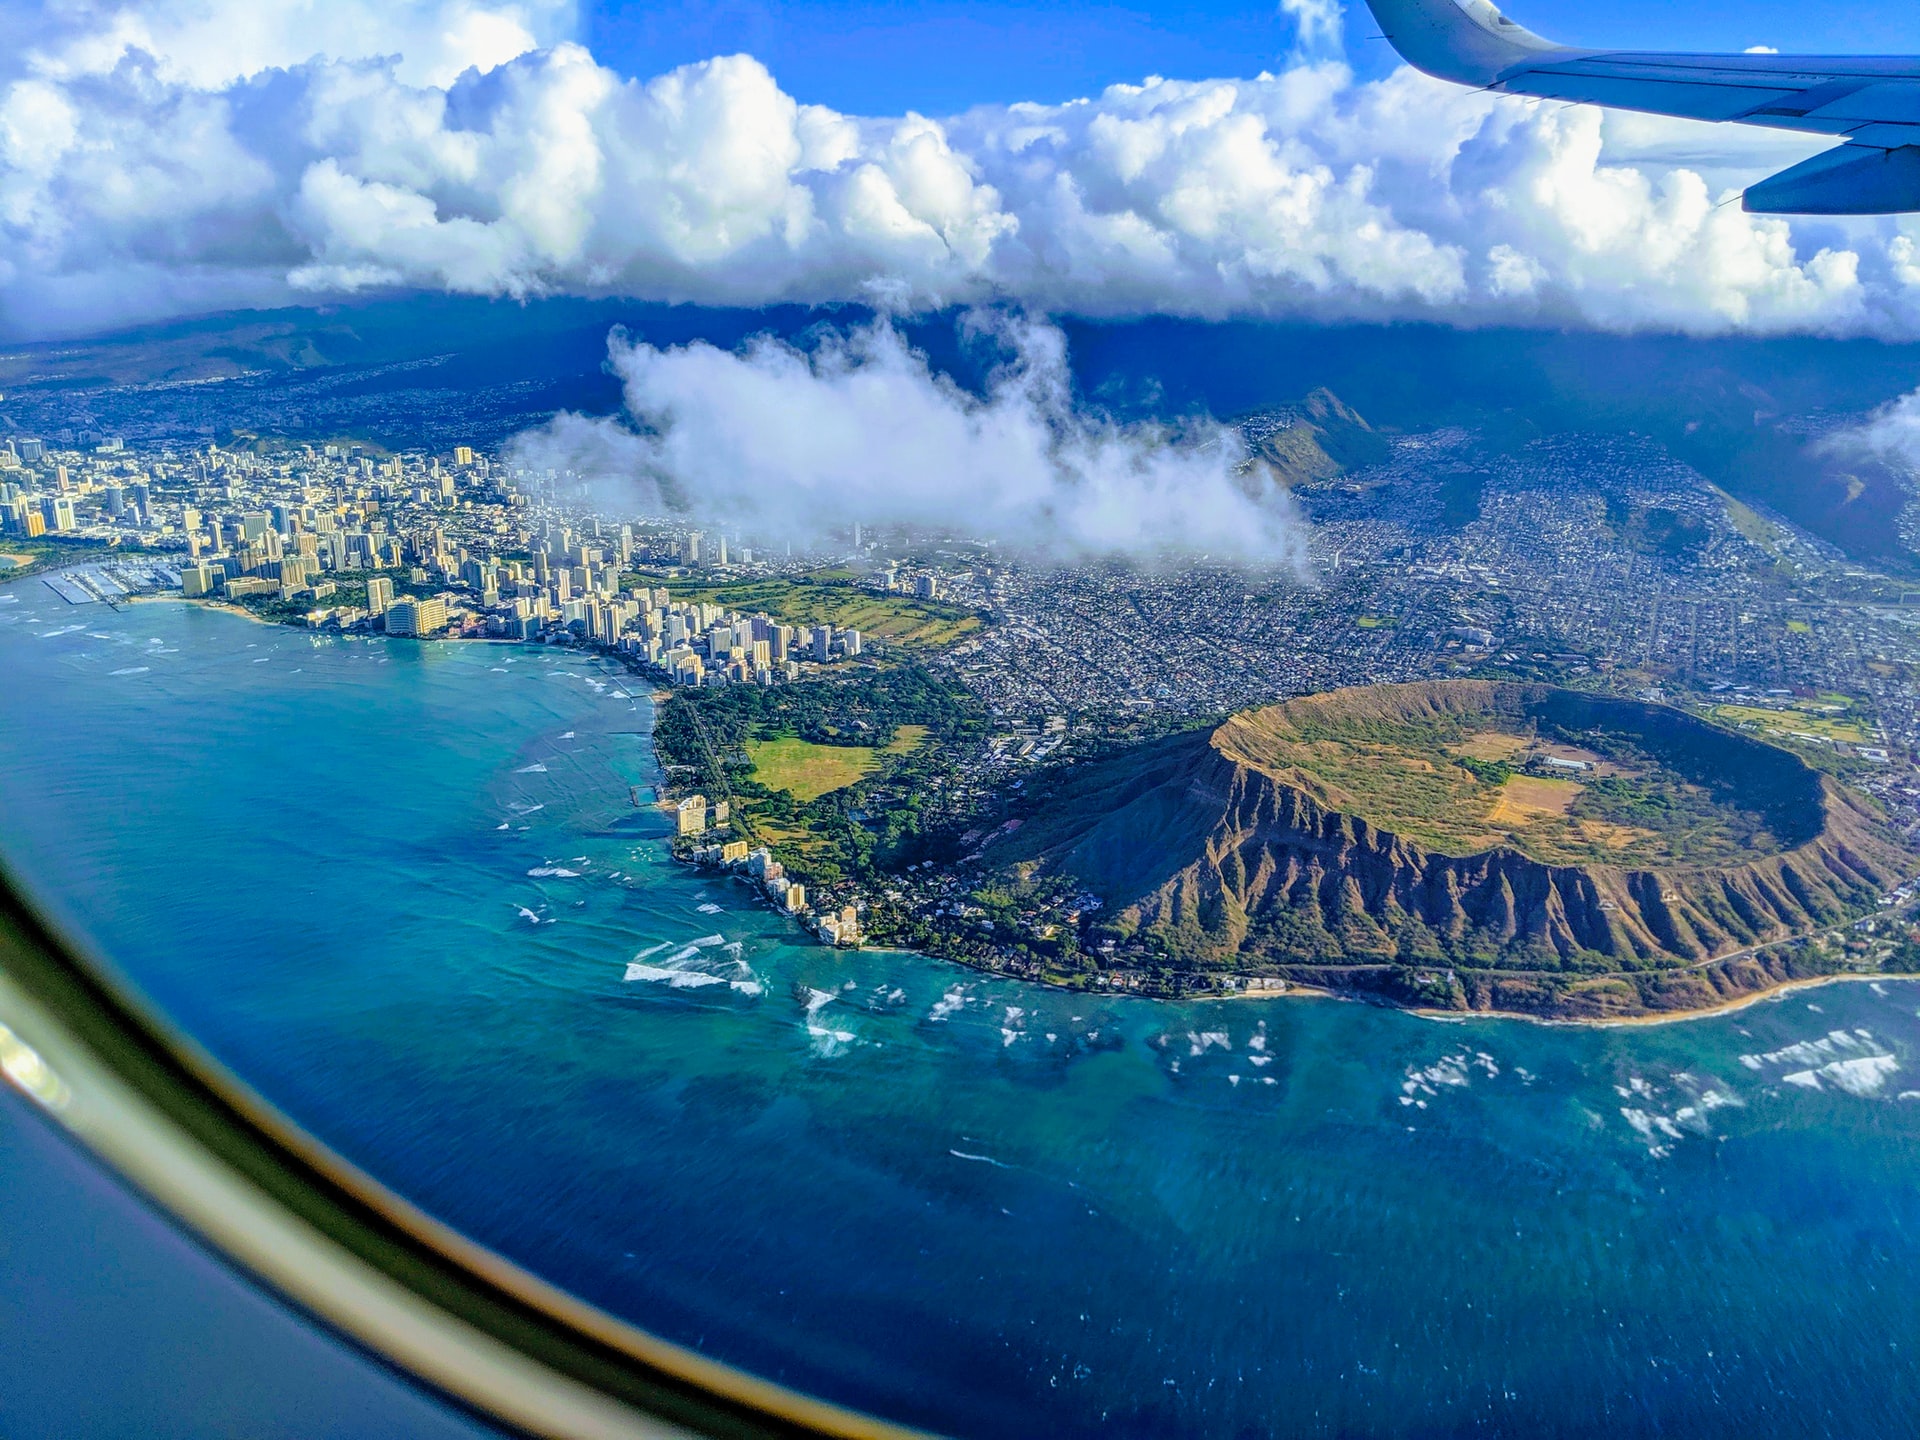 U.S. Airlines Lure Tourists to Visit Hawaii With $188 Round-Trips